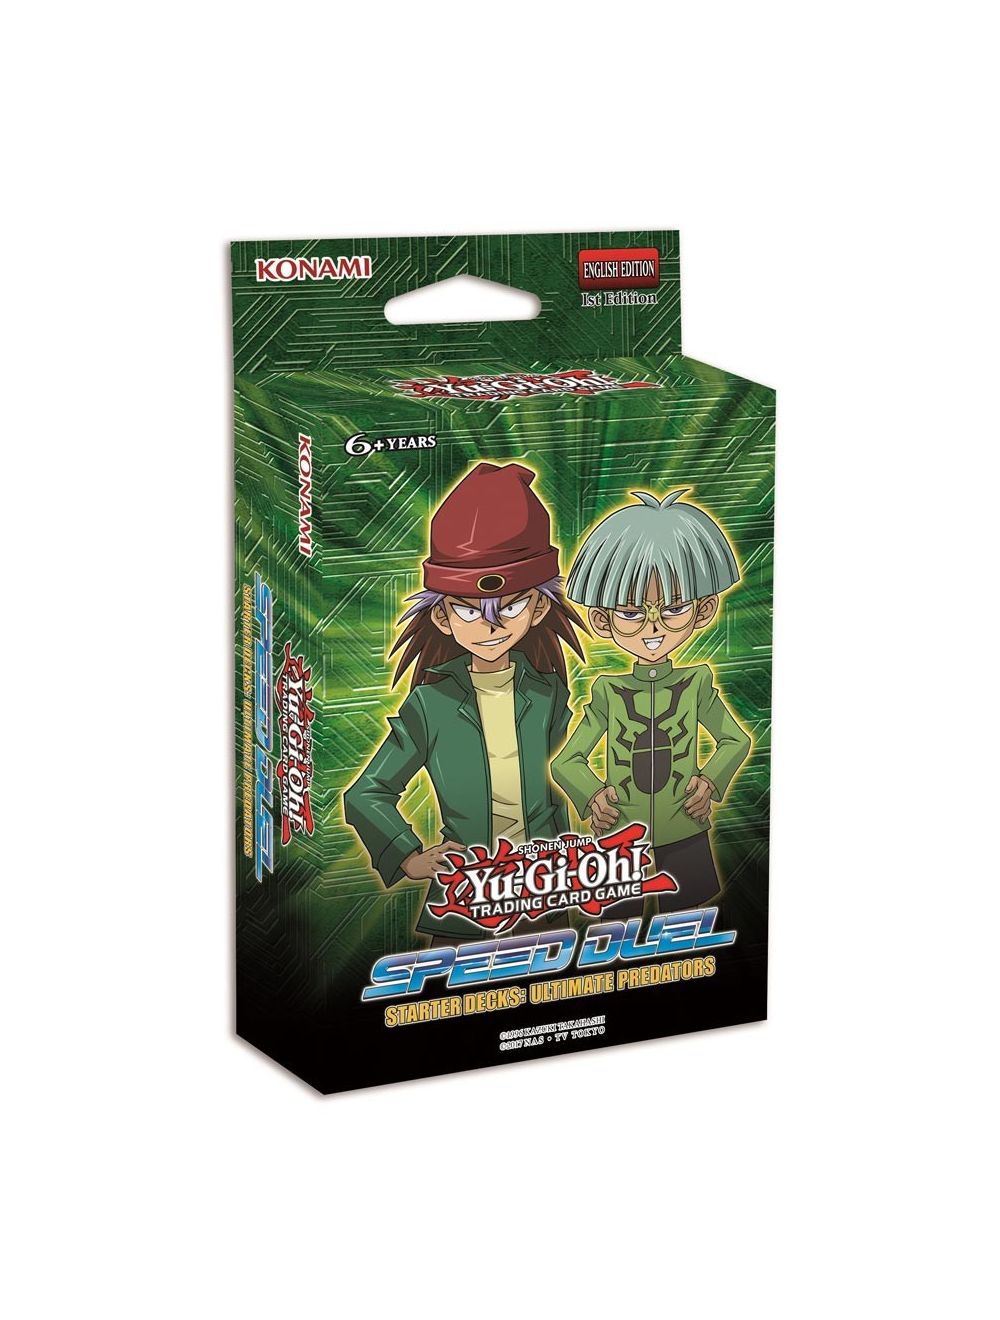 Details about   Yu-Gi-Oh Speed Duel Ultimate Predators Starter Deck Trading Card Game-unboxed 